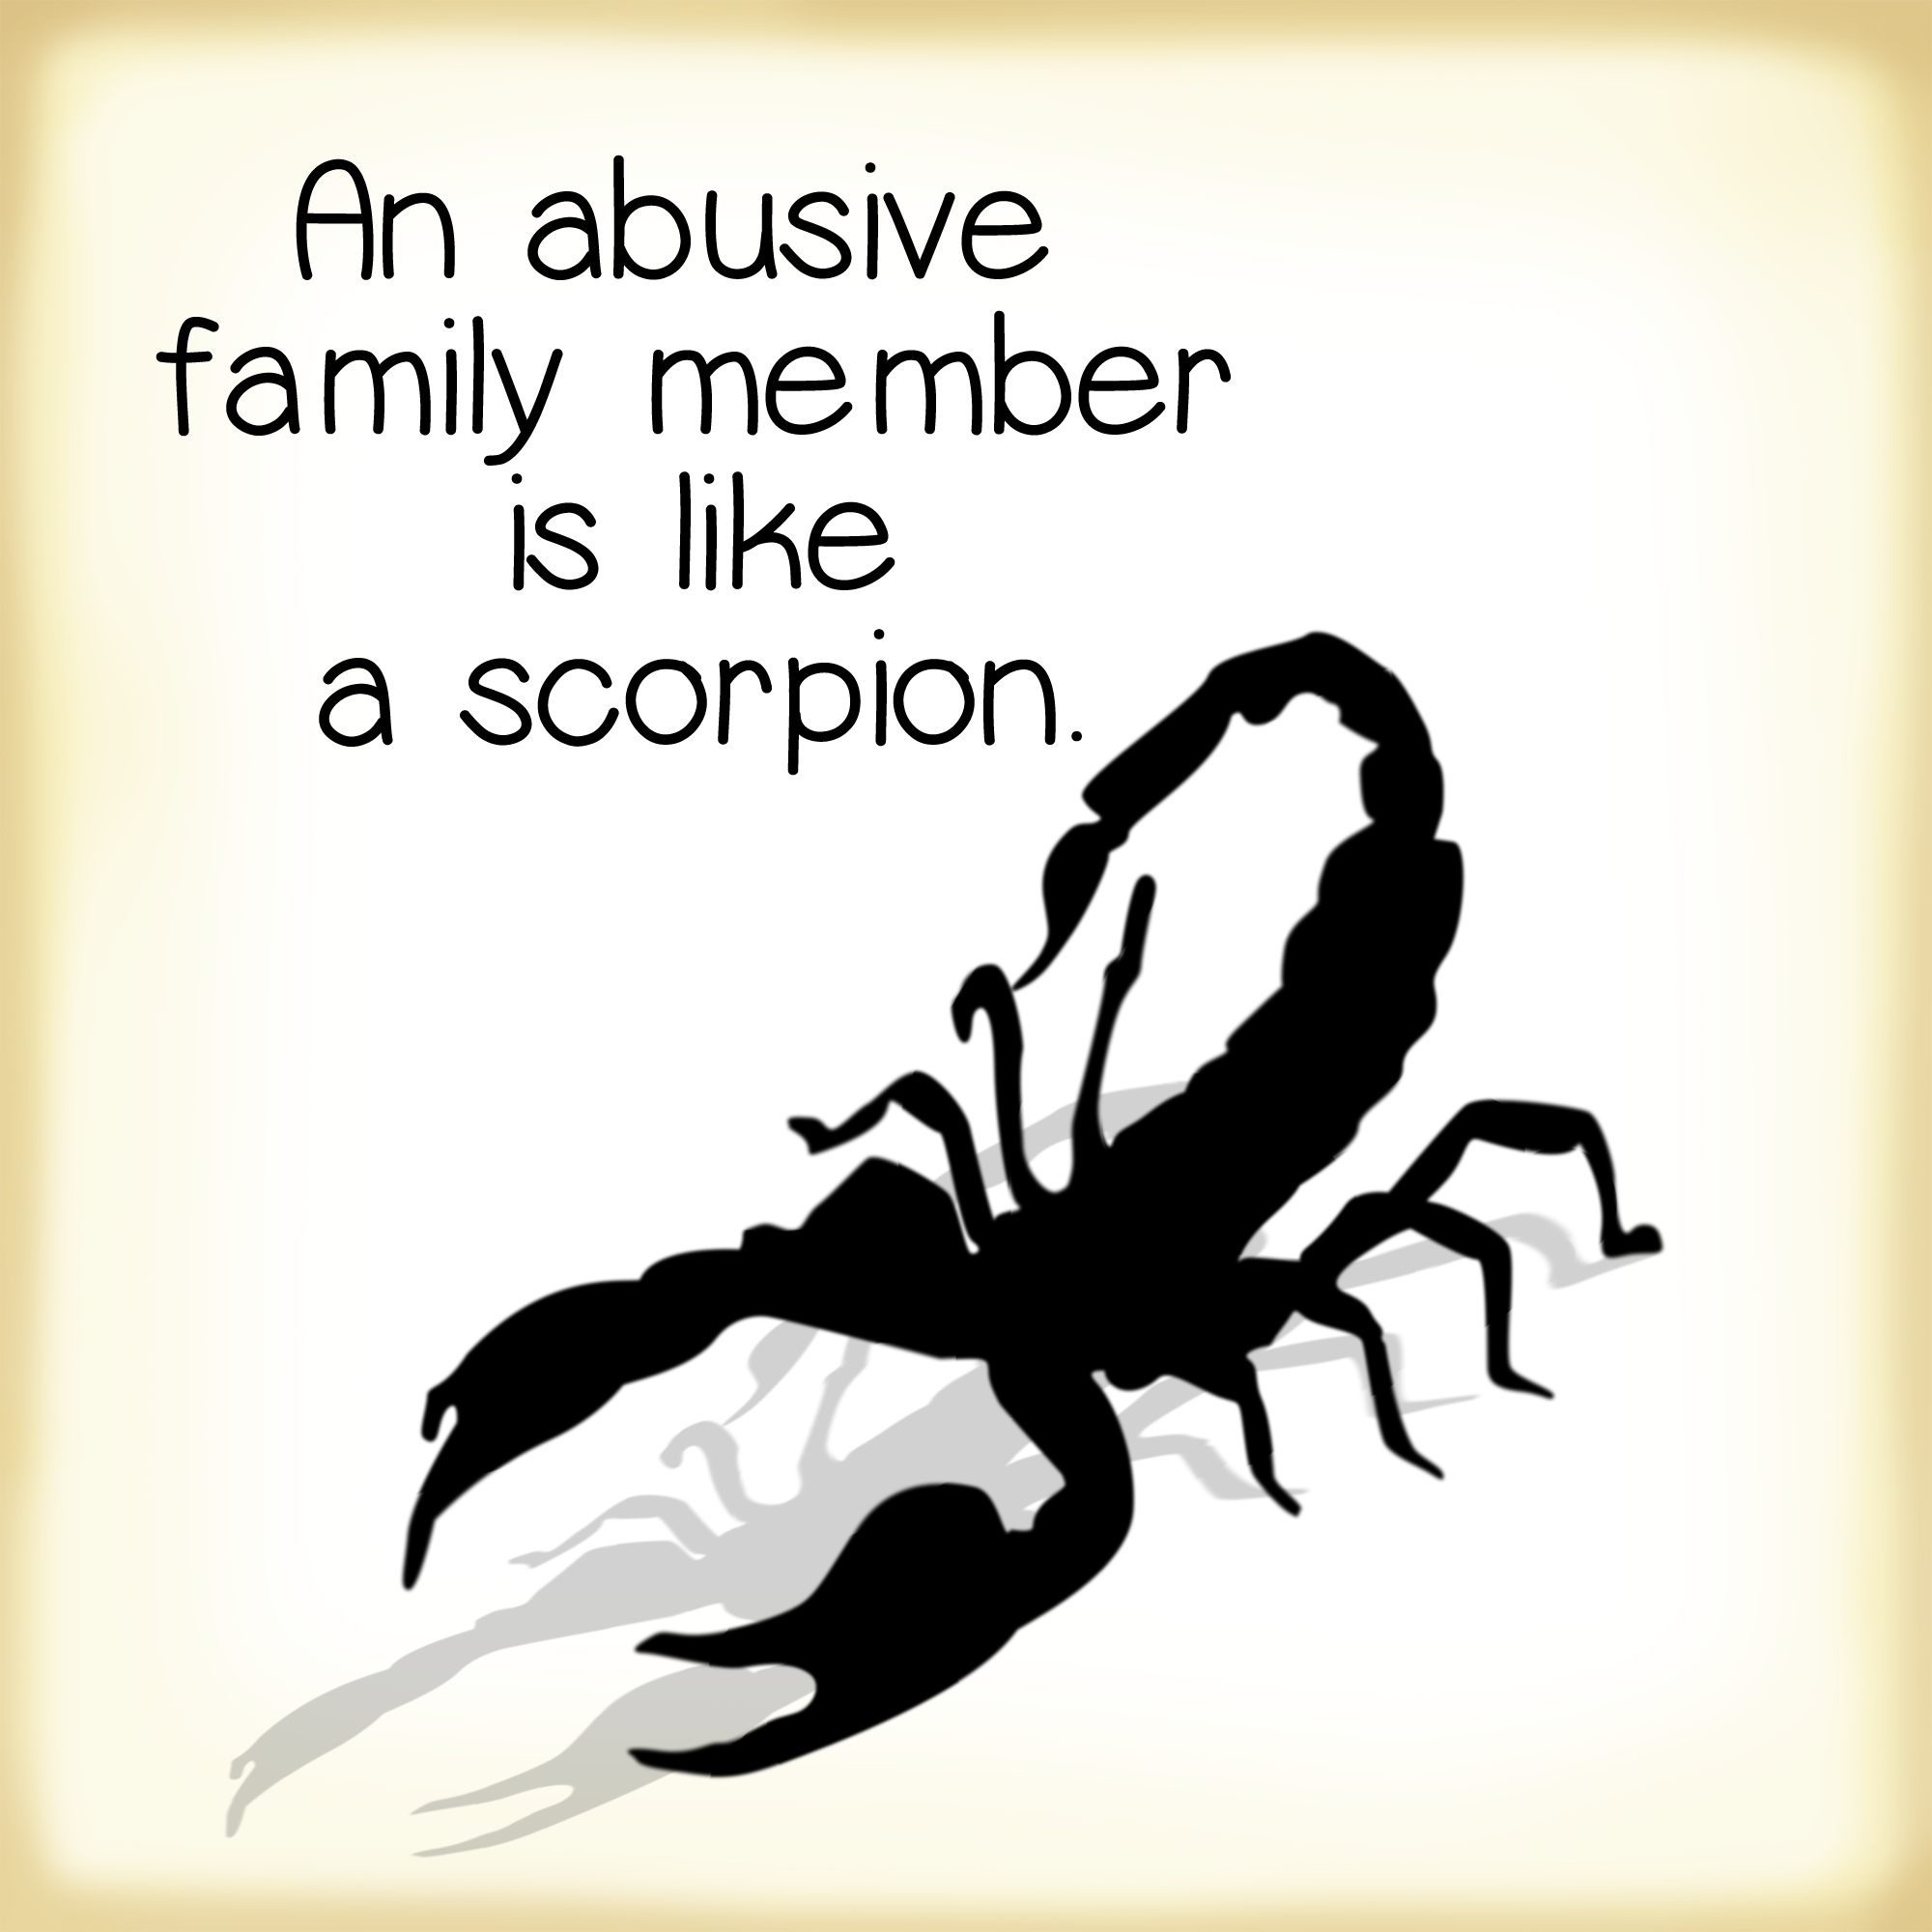 An abusive family member is like a scorpion